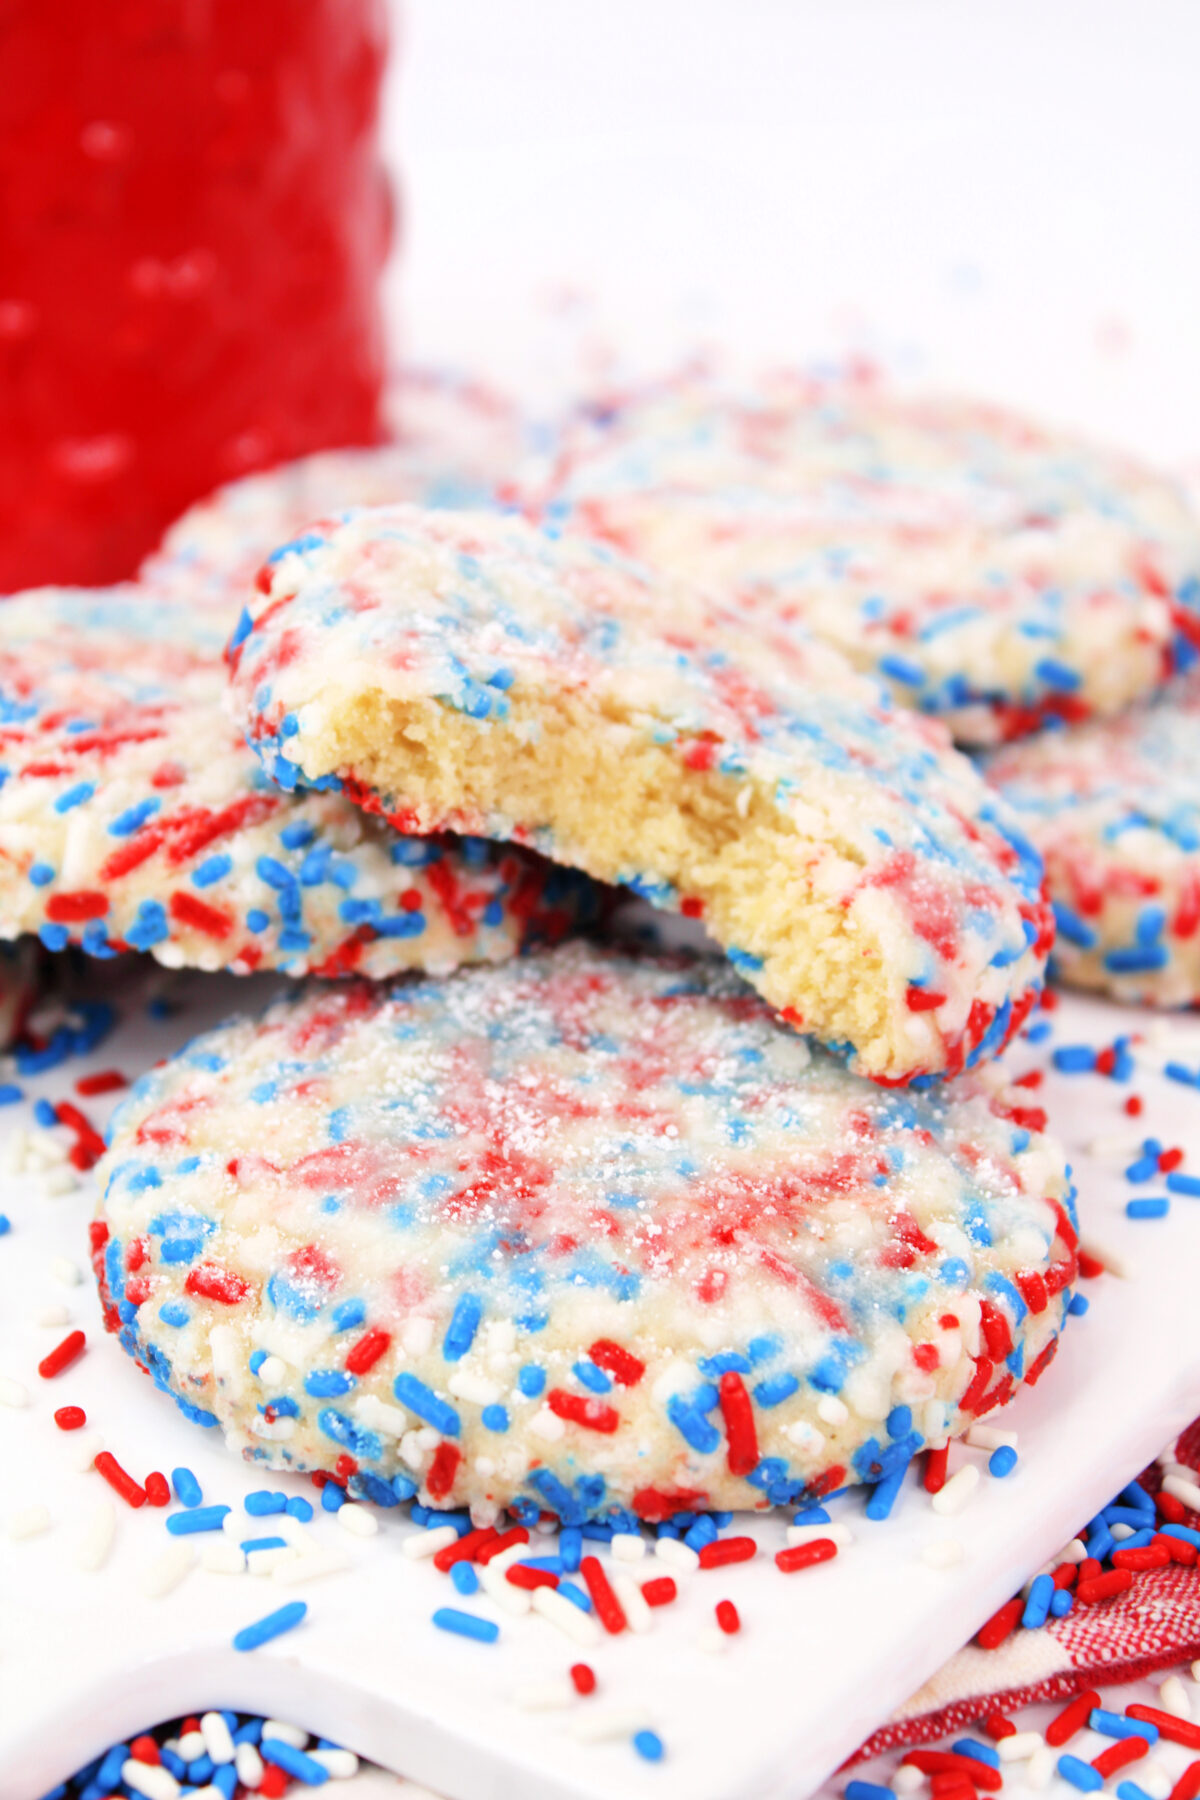 These festive red, white & blue cookies will put you in a patriotic mood. Patriotic funfetti cookies are the perfect way to celebrate!